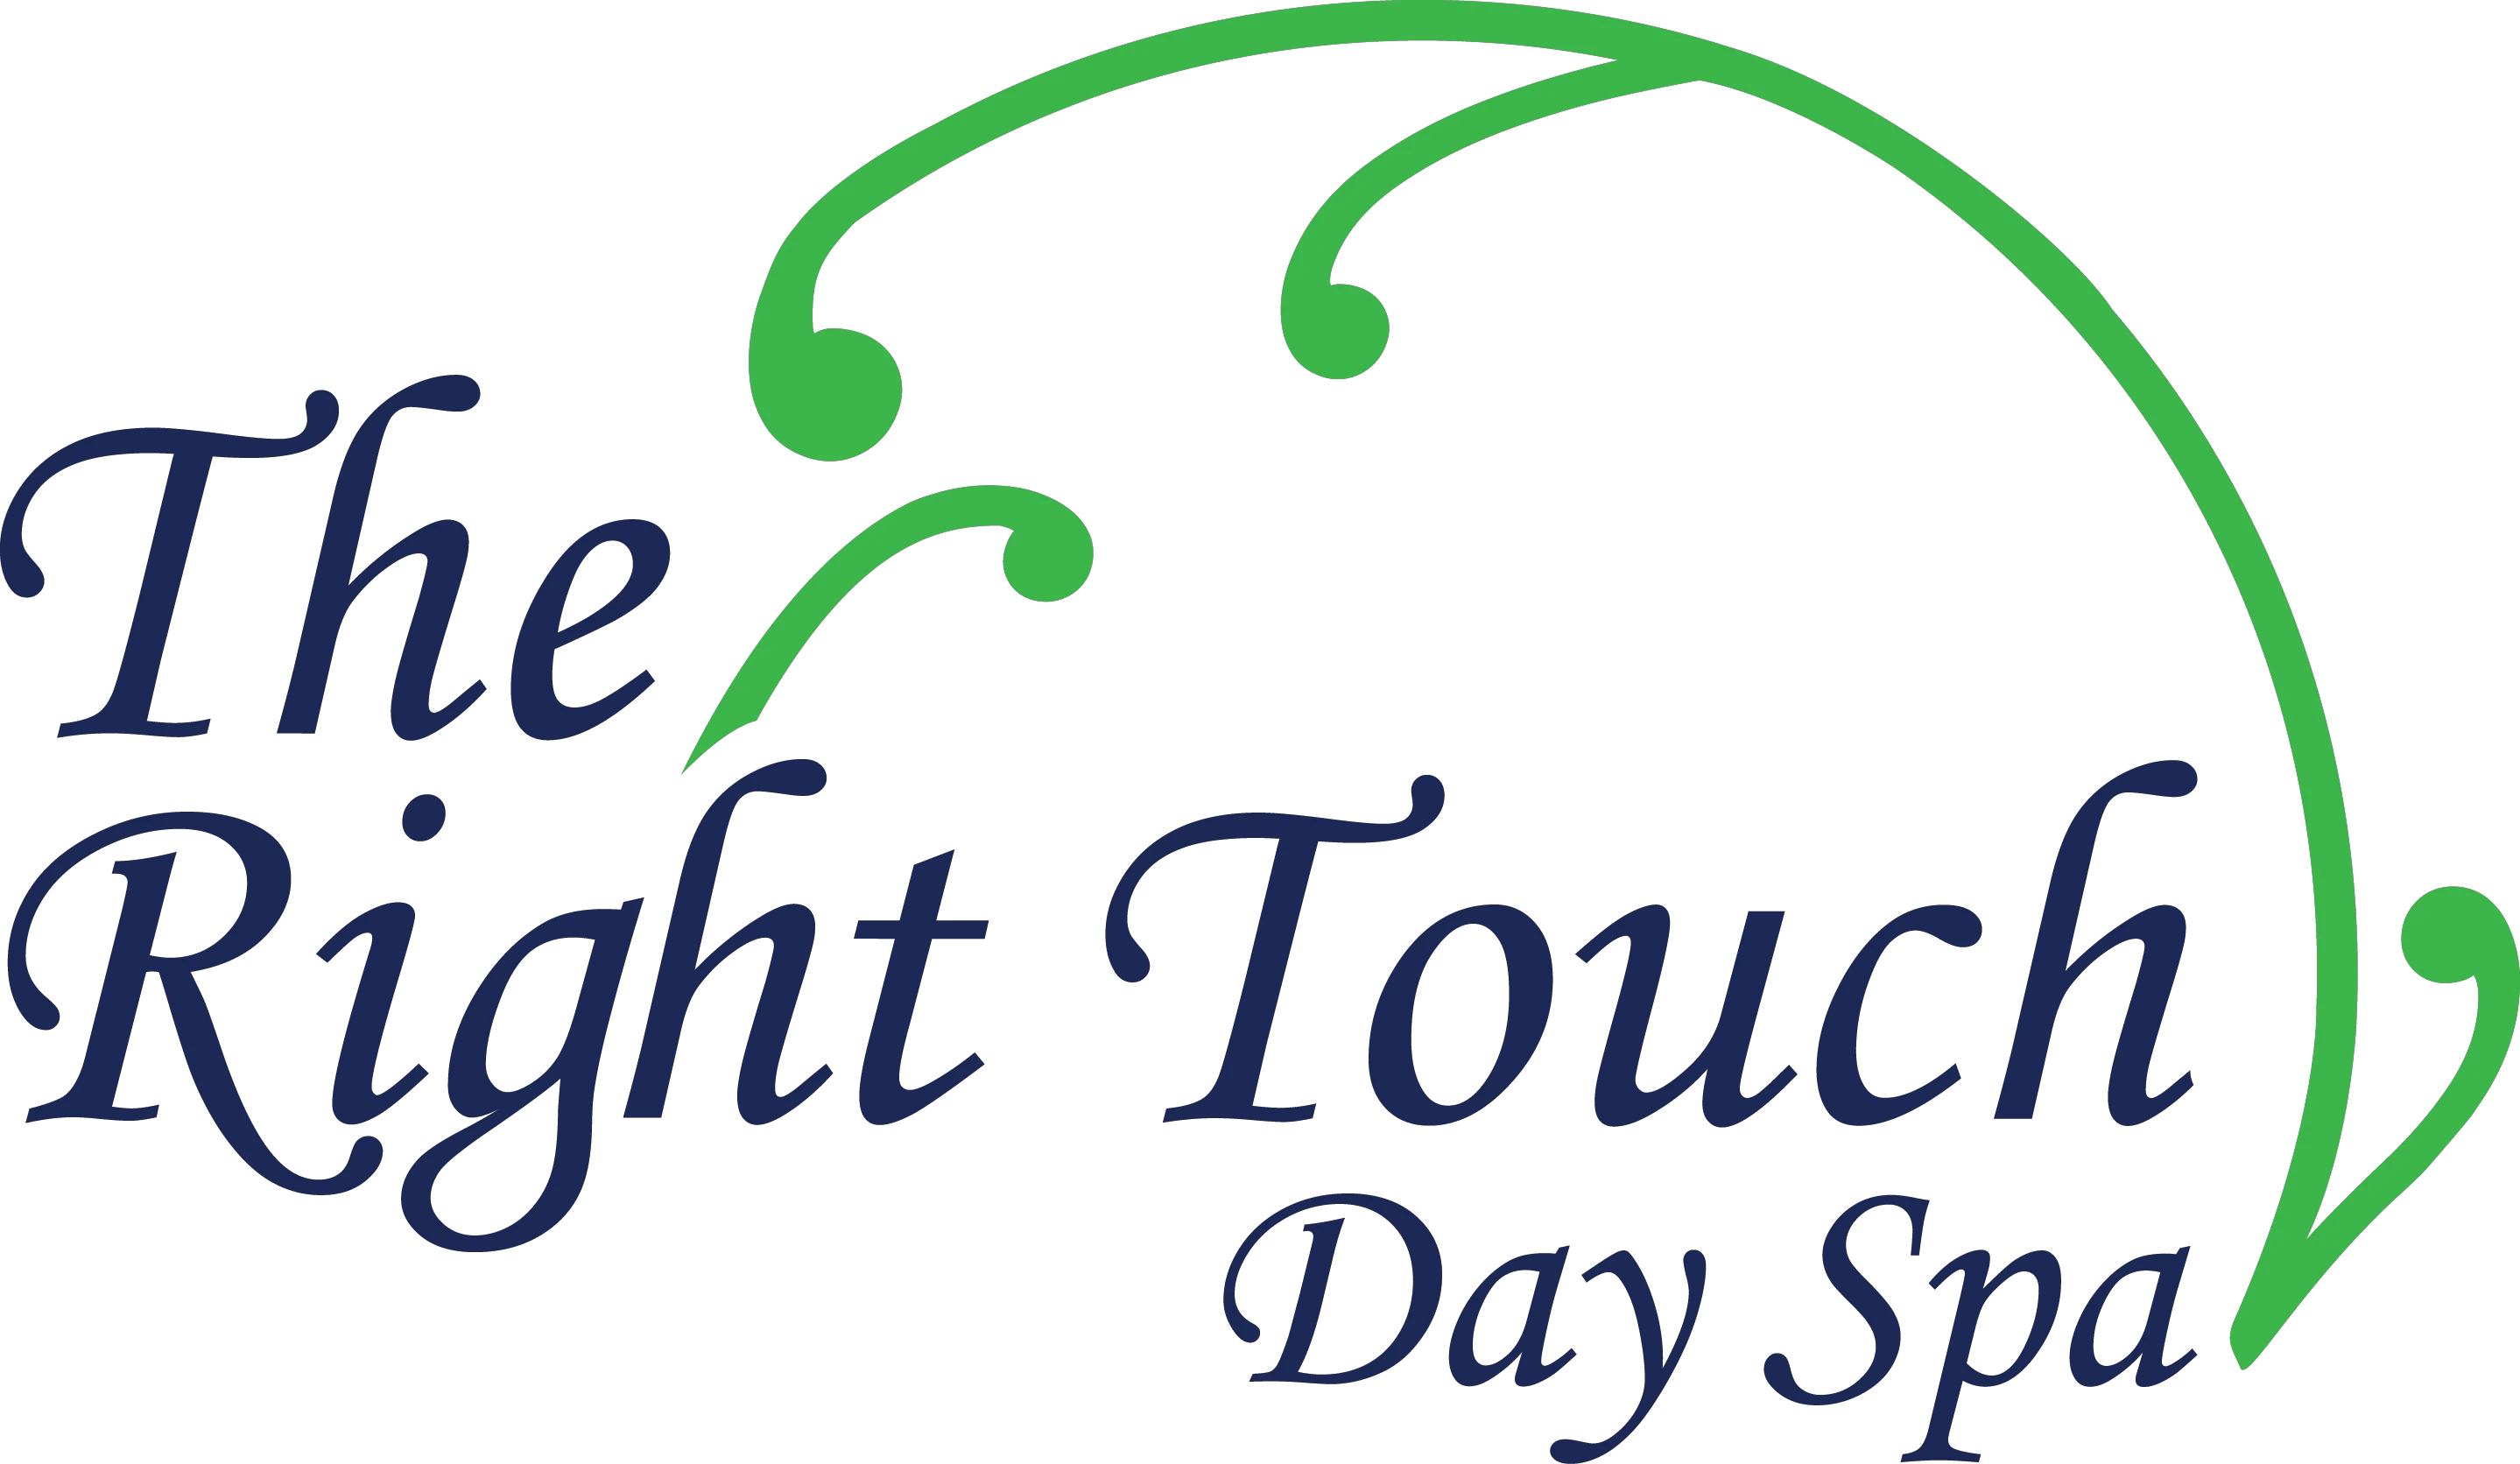 therighttouchdayspa.com